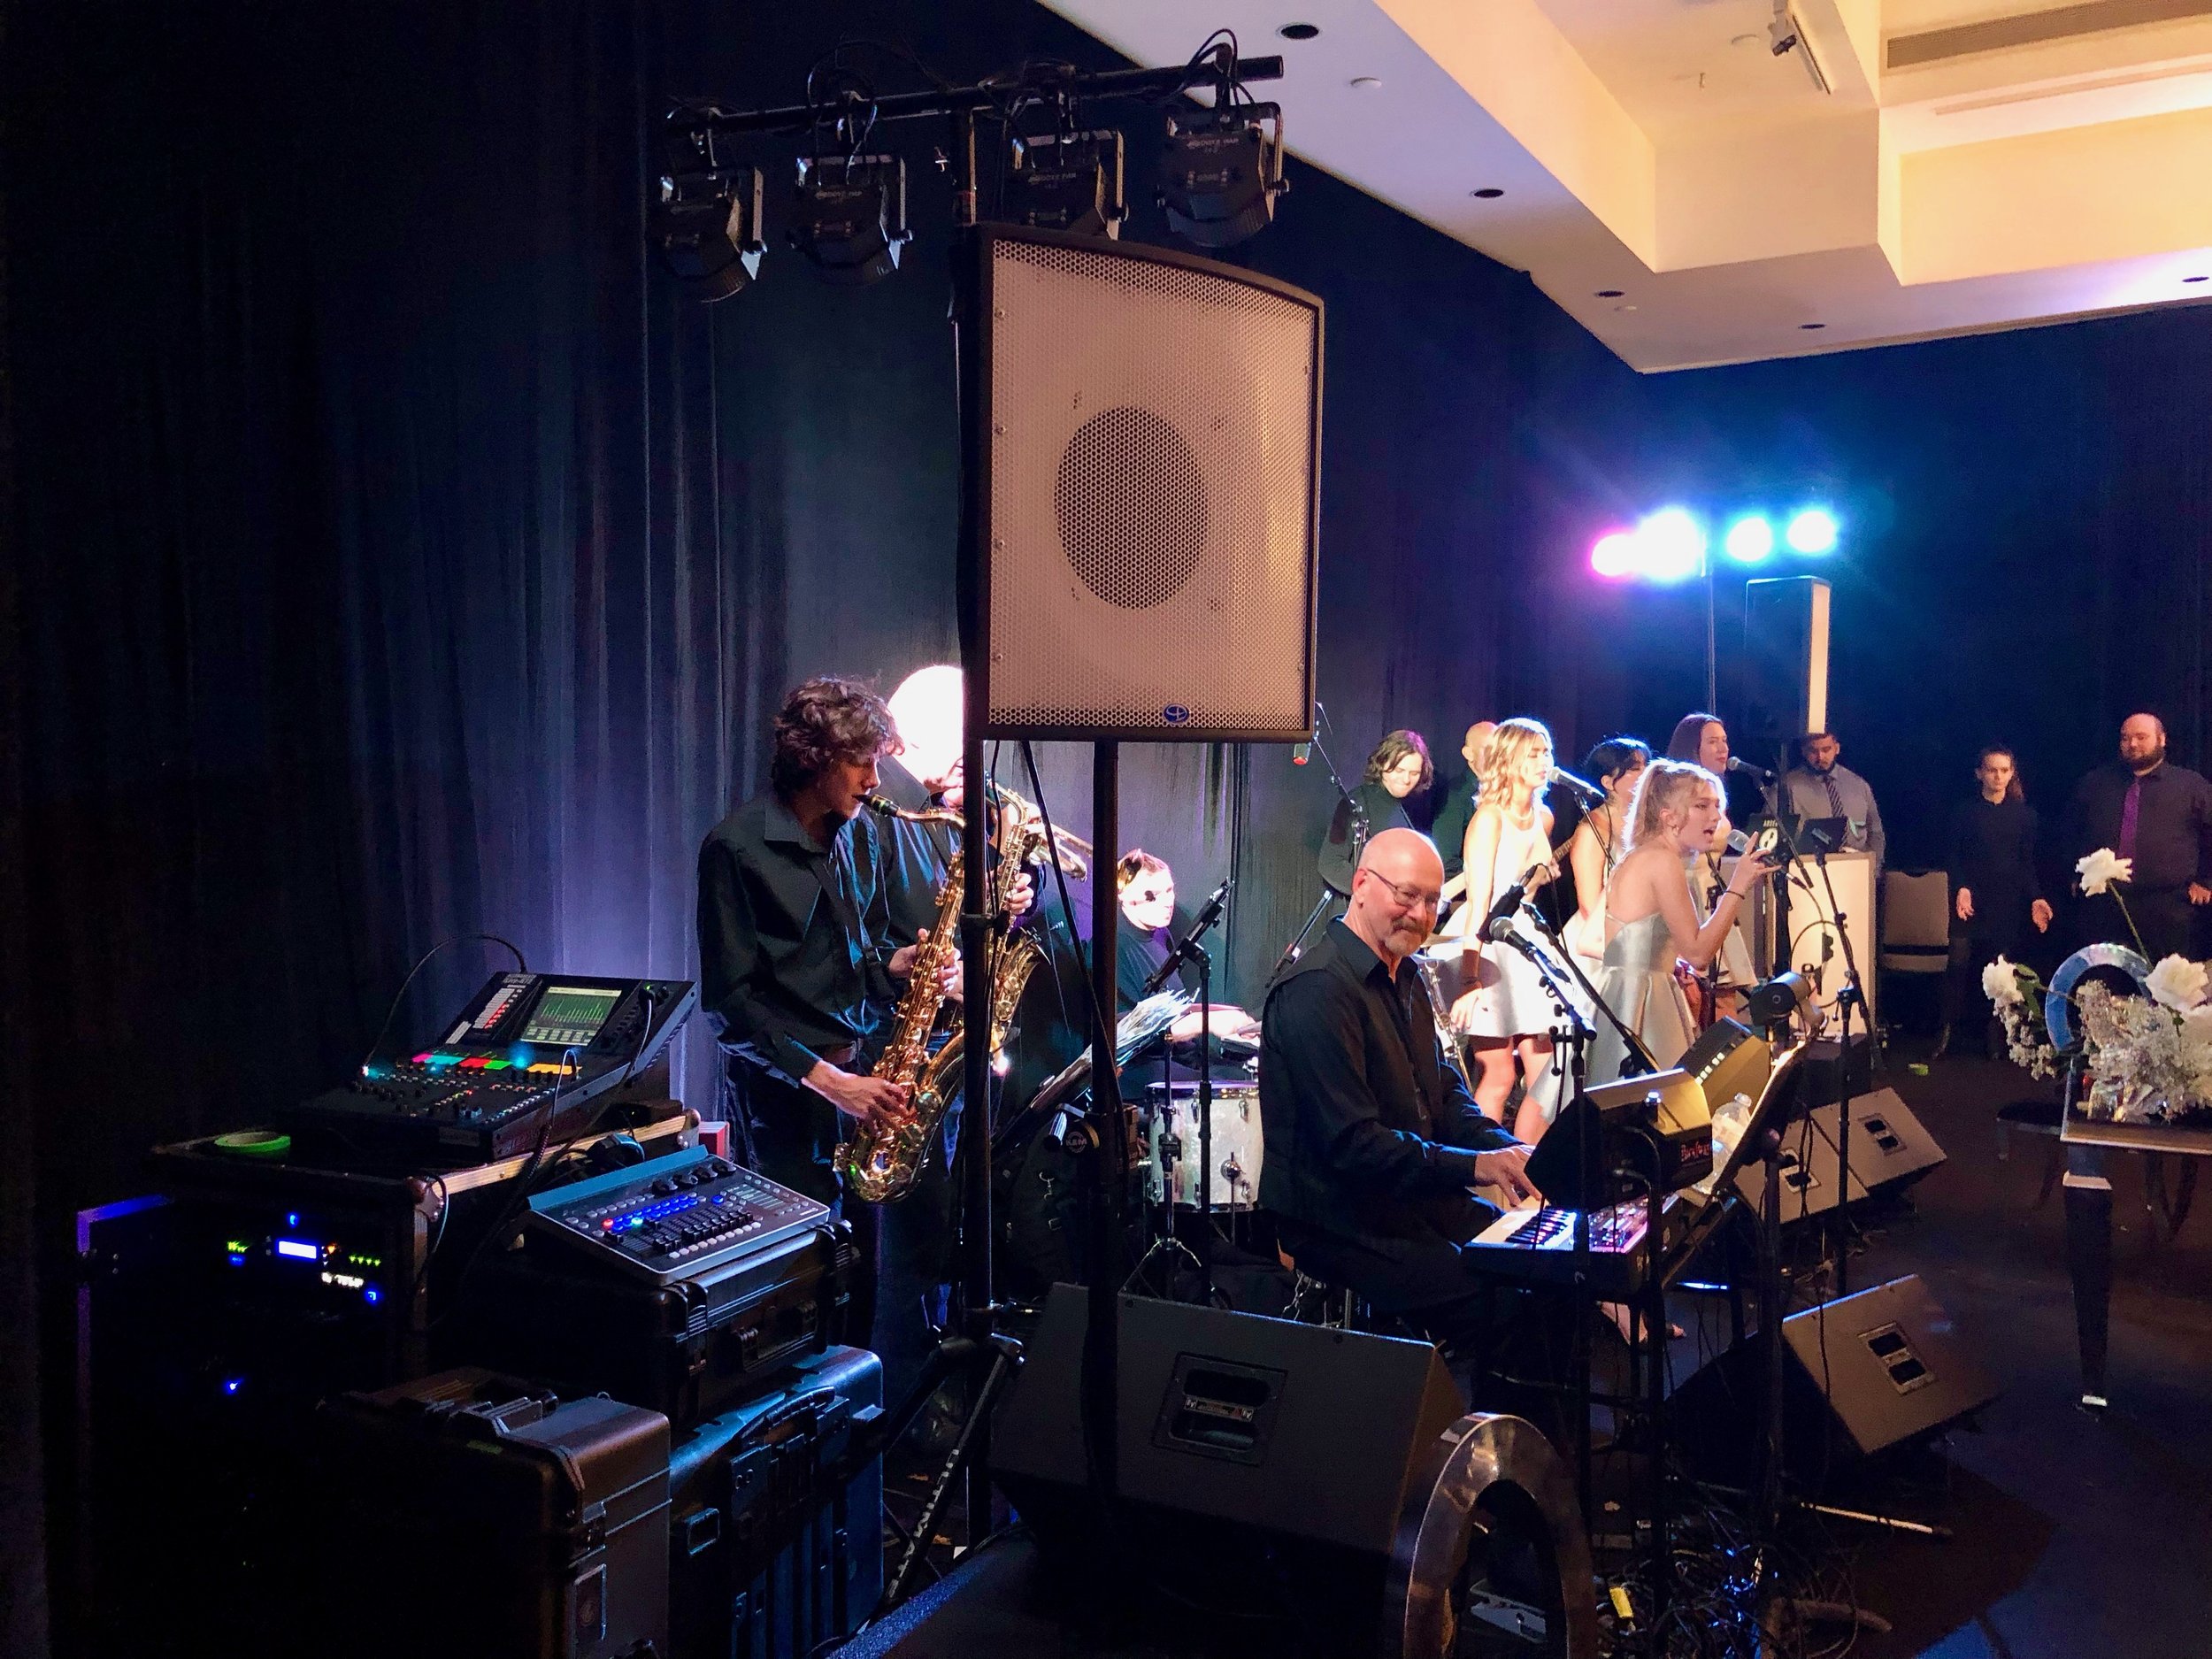  The Midnights performing at a private wedding, Delta Ocean Pointe Resort Victoria, 2021 